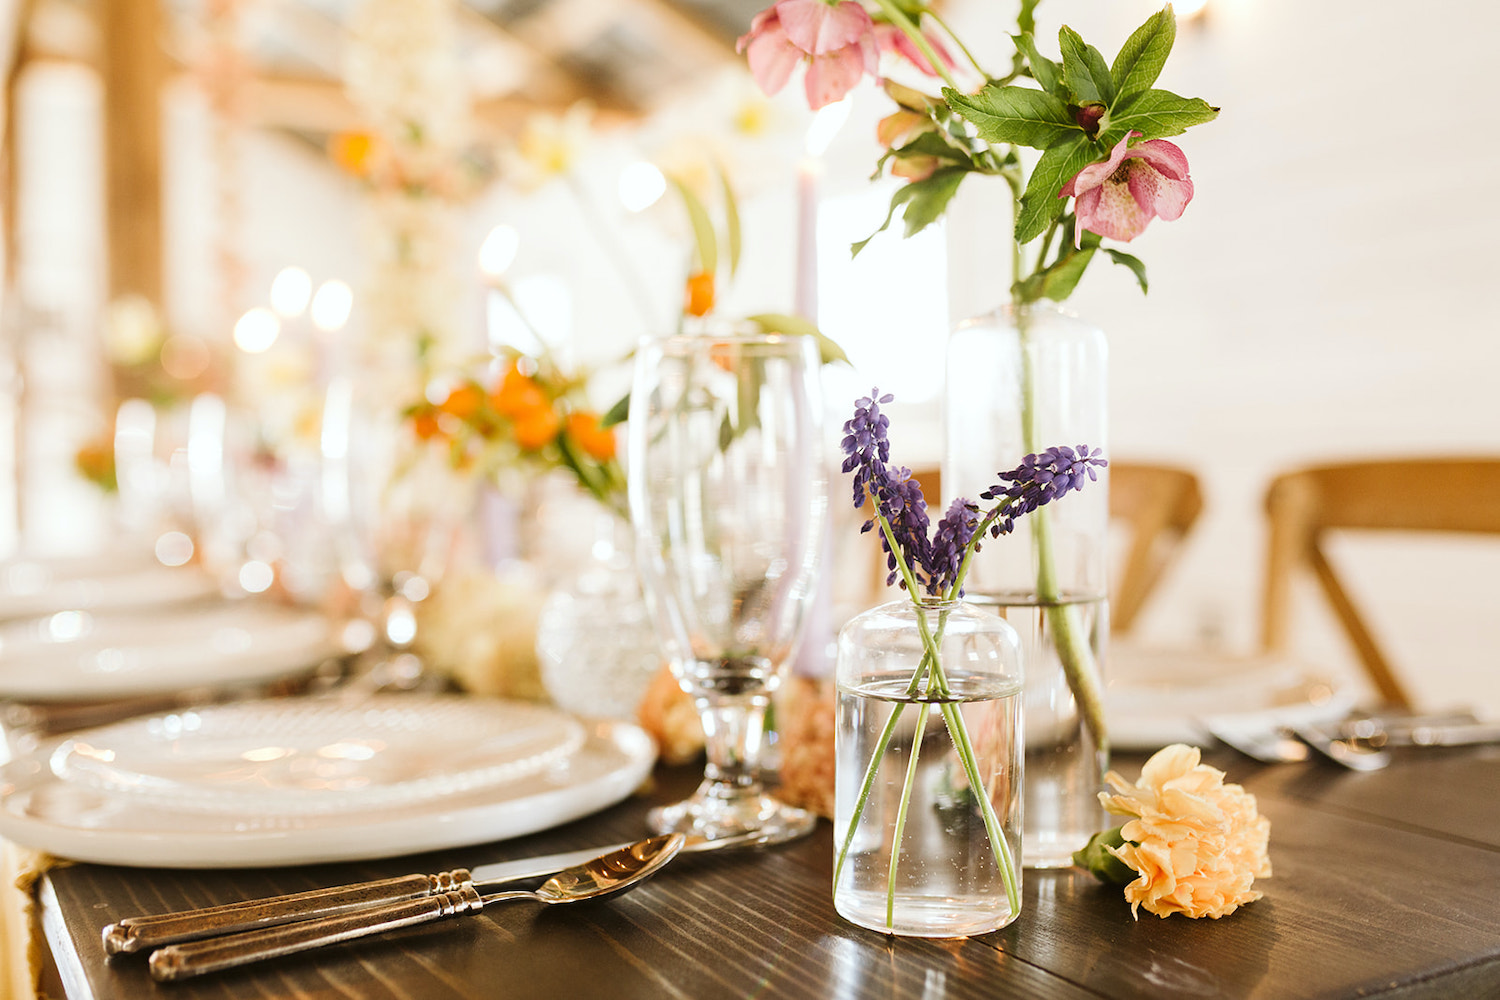 simple purple flowers in a simple glass vase on a wooden farm table next to white china and flatware